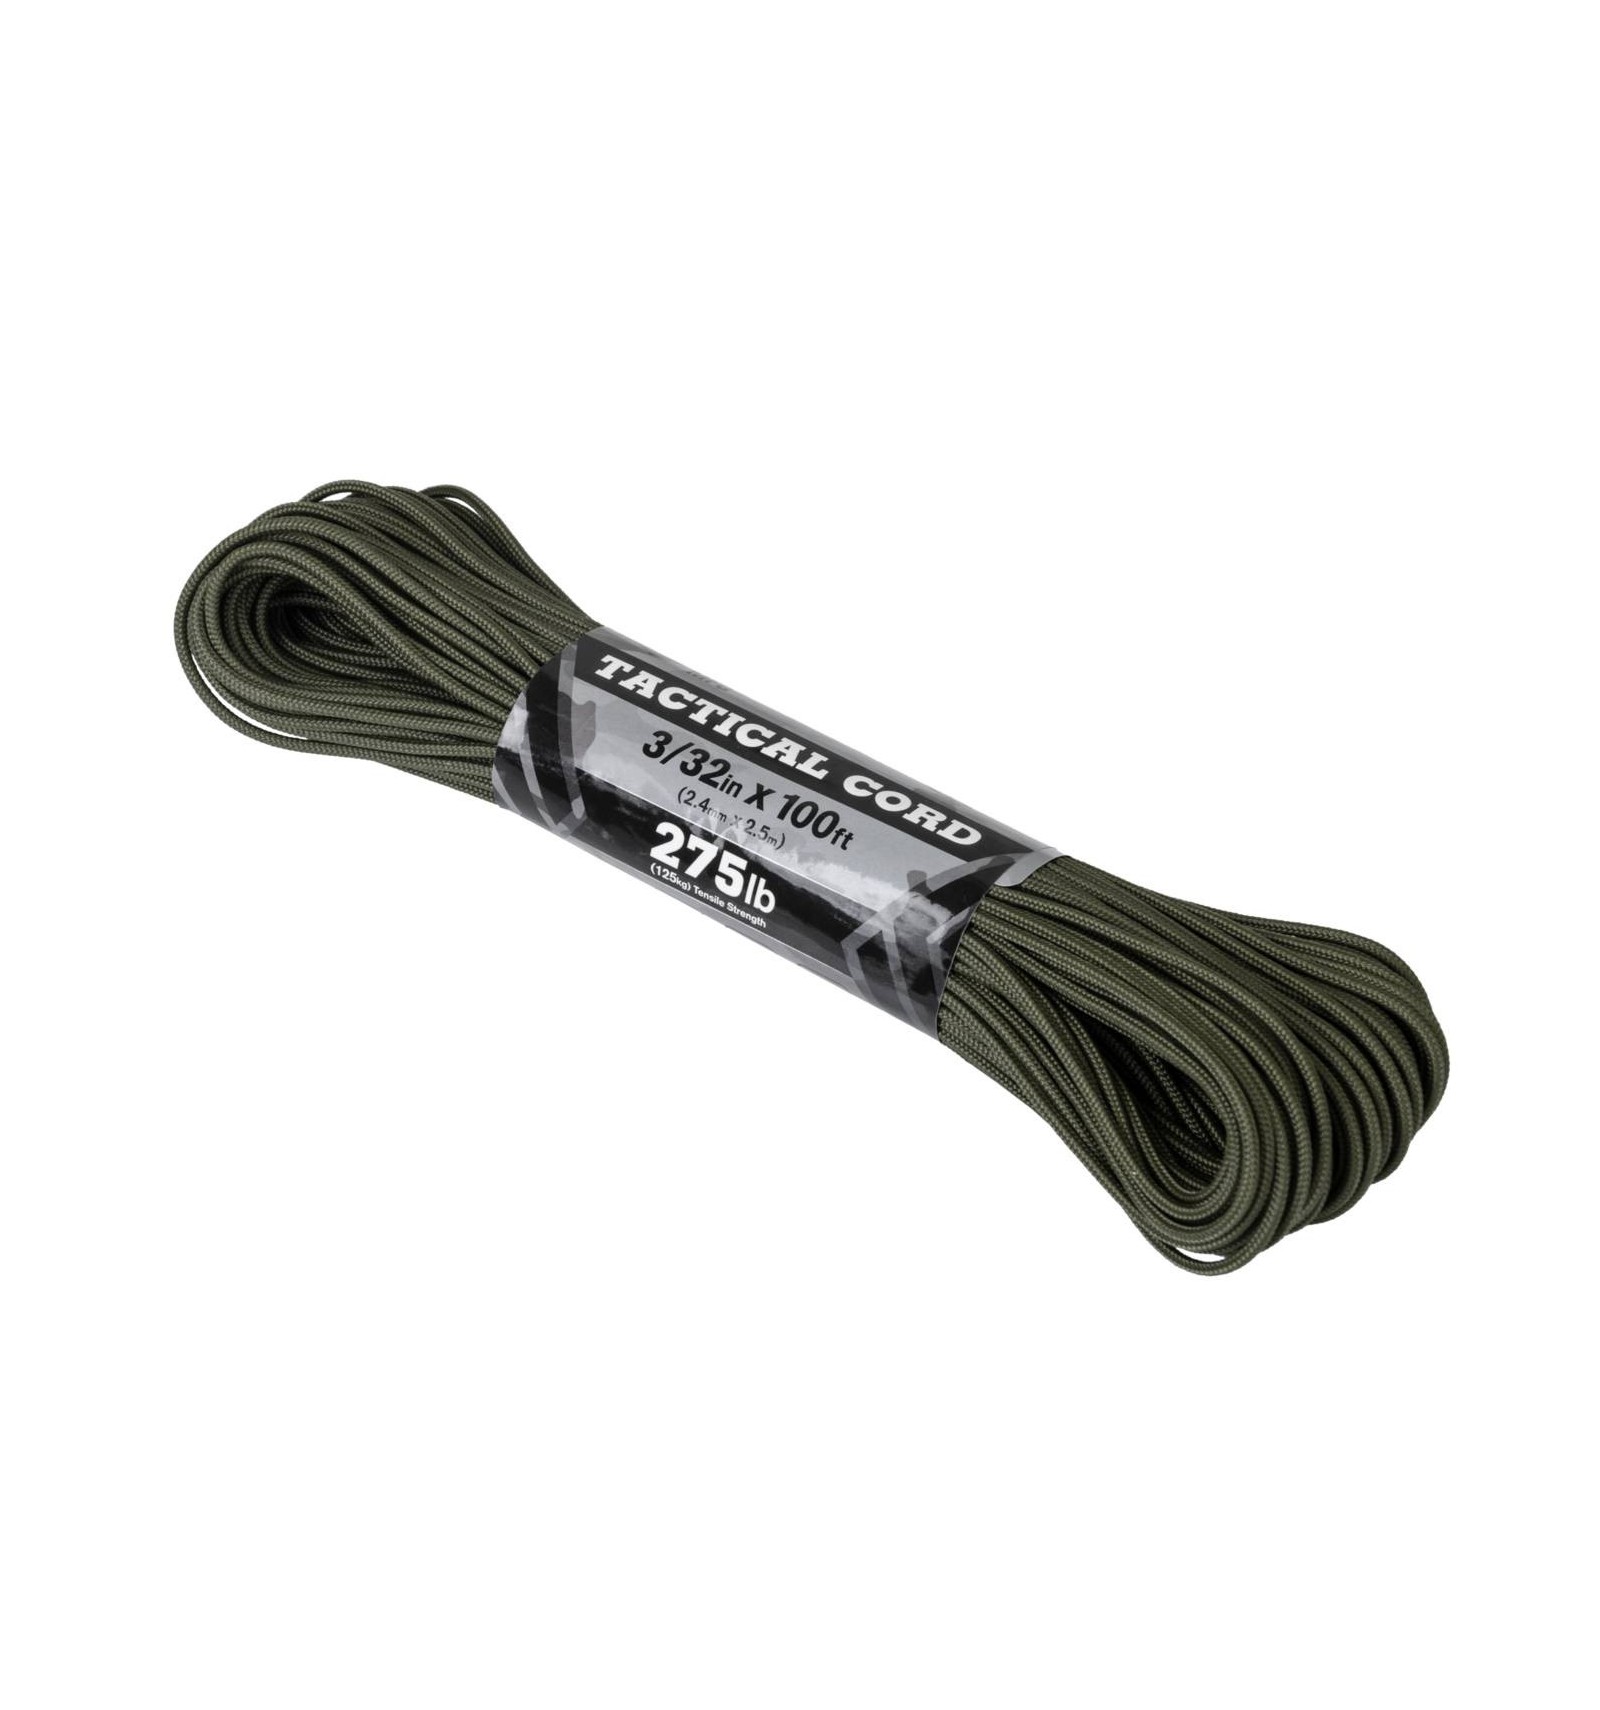 Atwood  275 Paracord (100ft)